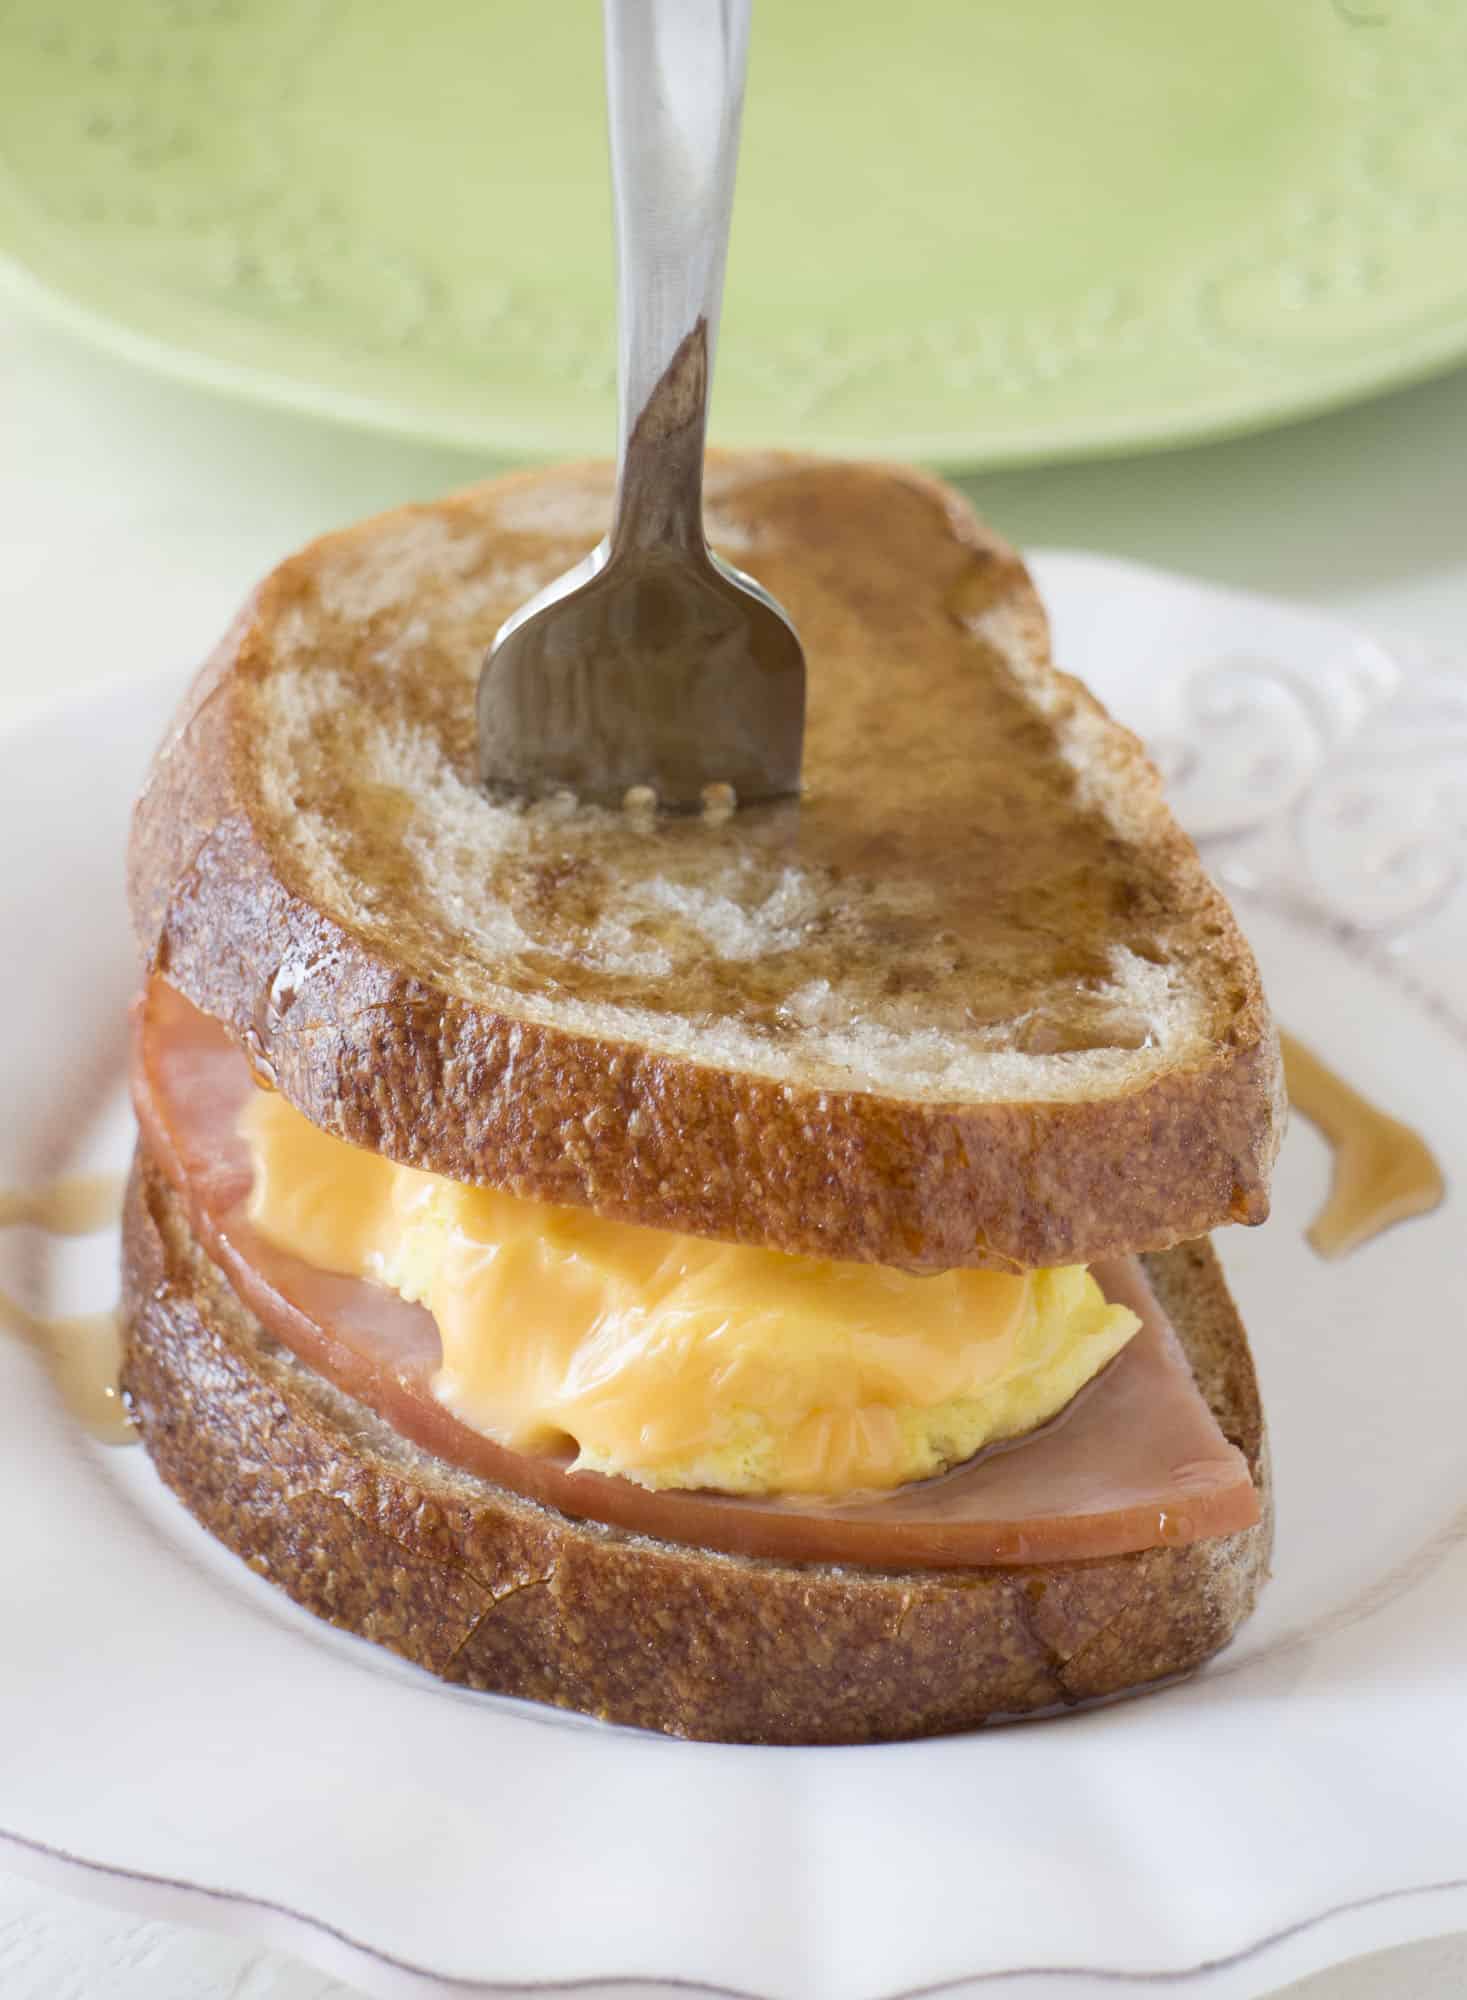 EASY, YUMMY breakfast sandwich made in 2 MINUTES! This Maple Syrup, Egg, Ham and Cheese Sandwich recipe is great for a quick breakfast! You can freeze the sandwiches to make ahead too! They taste like french toast to me!